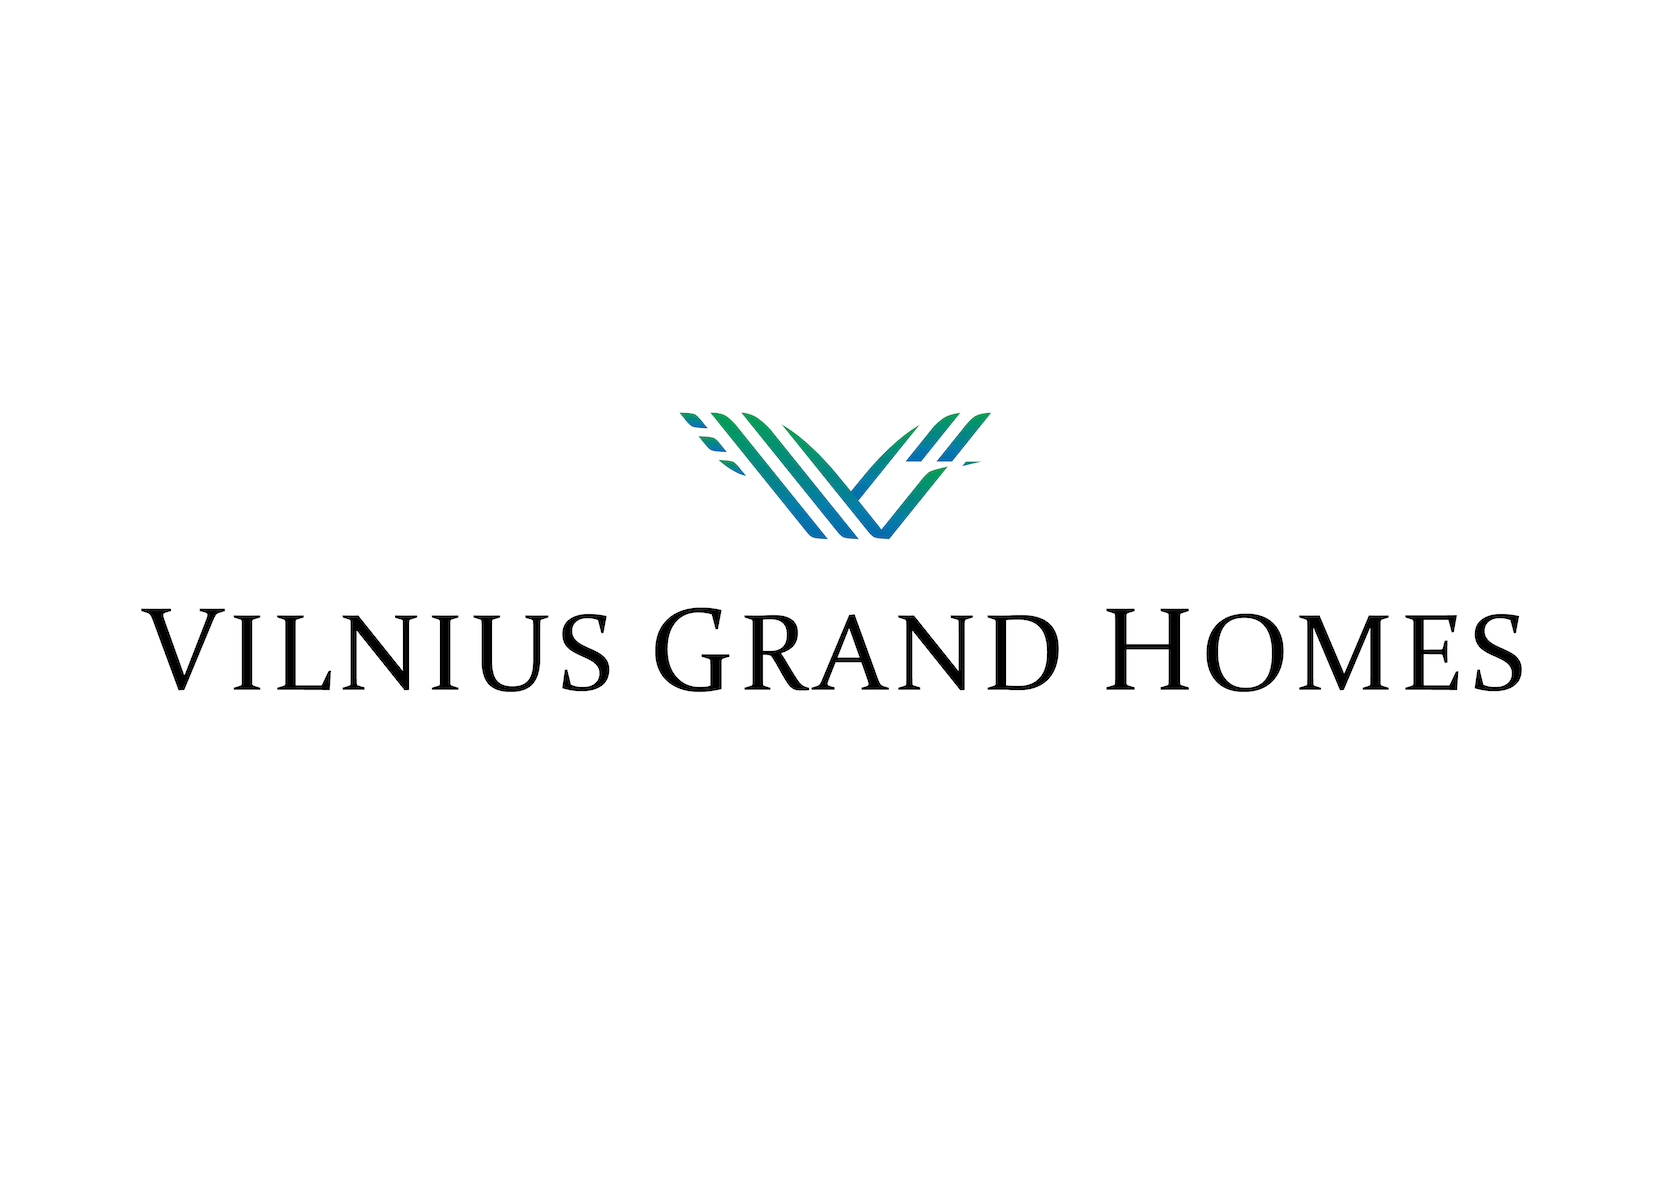 Vilnius Grand Homes partnering with THIRDHOME